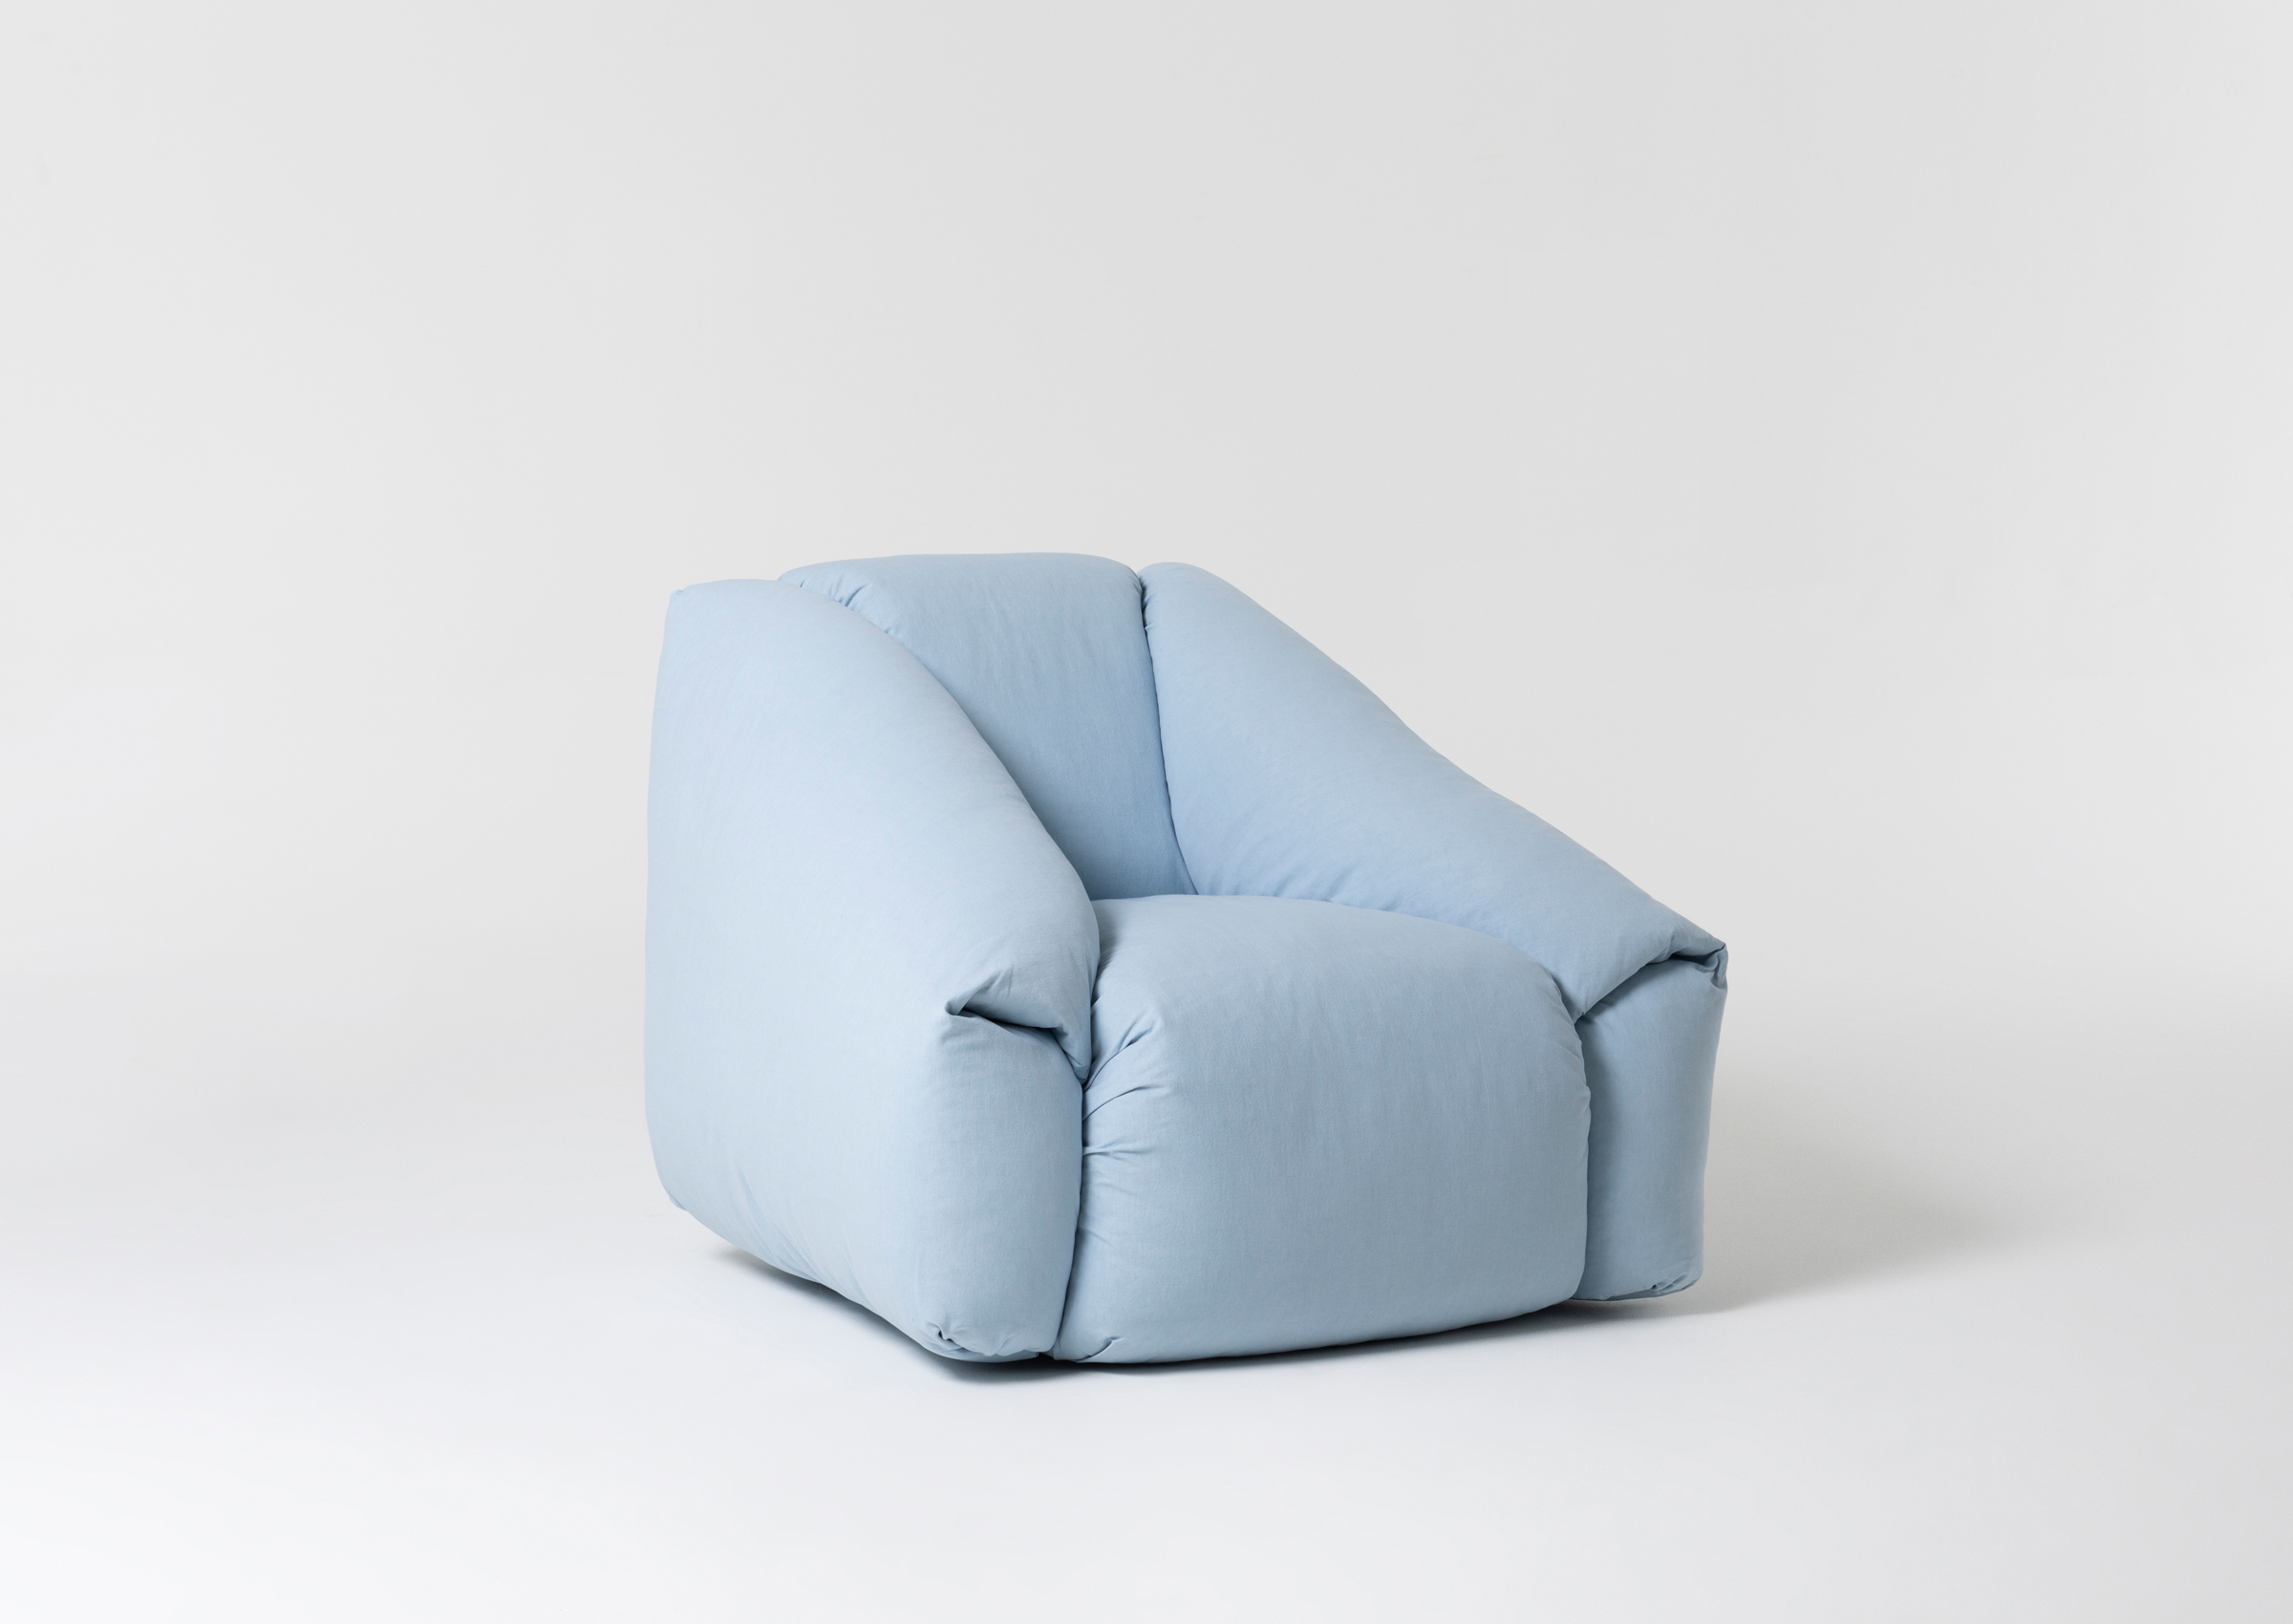 Philippe Malouin creates foam chair for Established & Sons